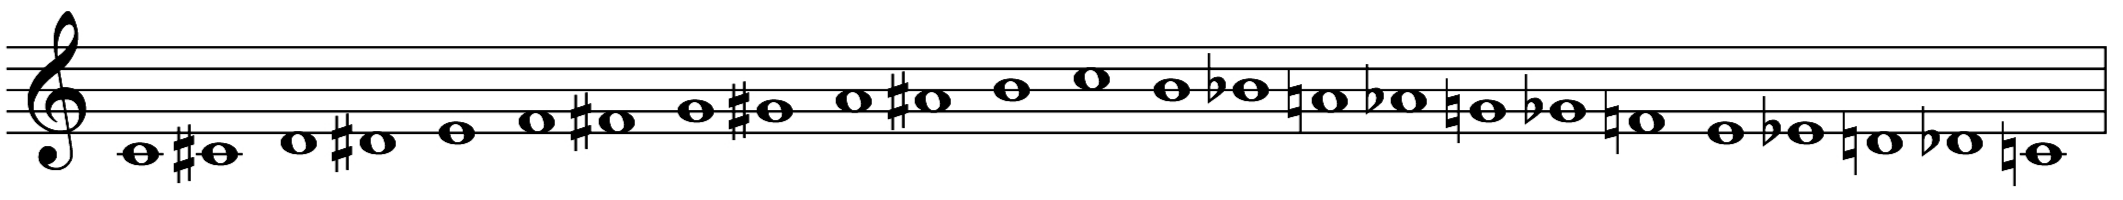 A chromatic scale drawn from C4 to C5 ascending and descending on a staff.